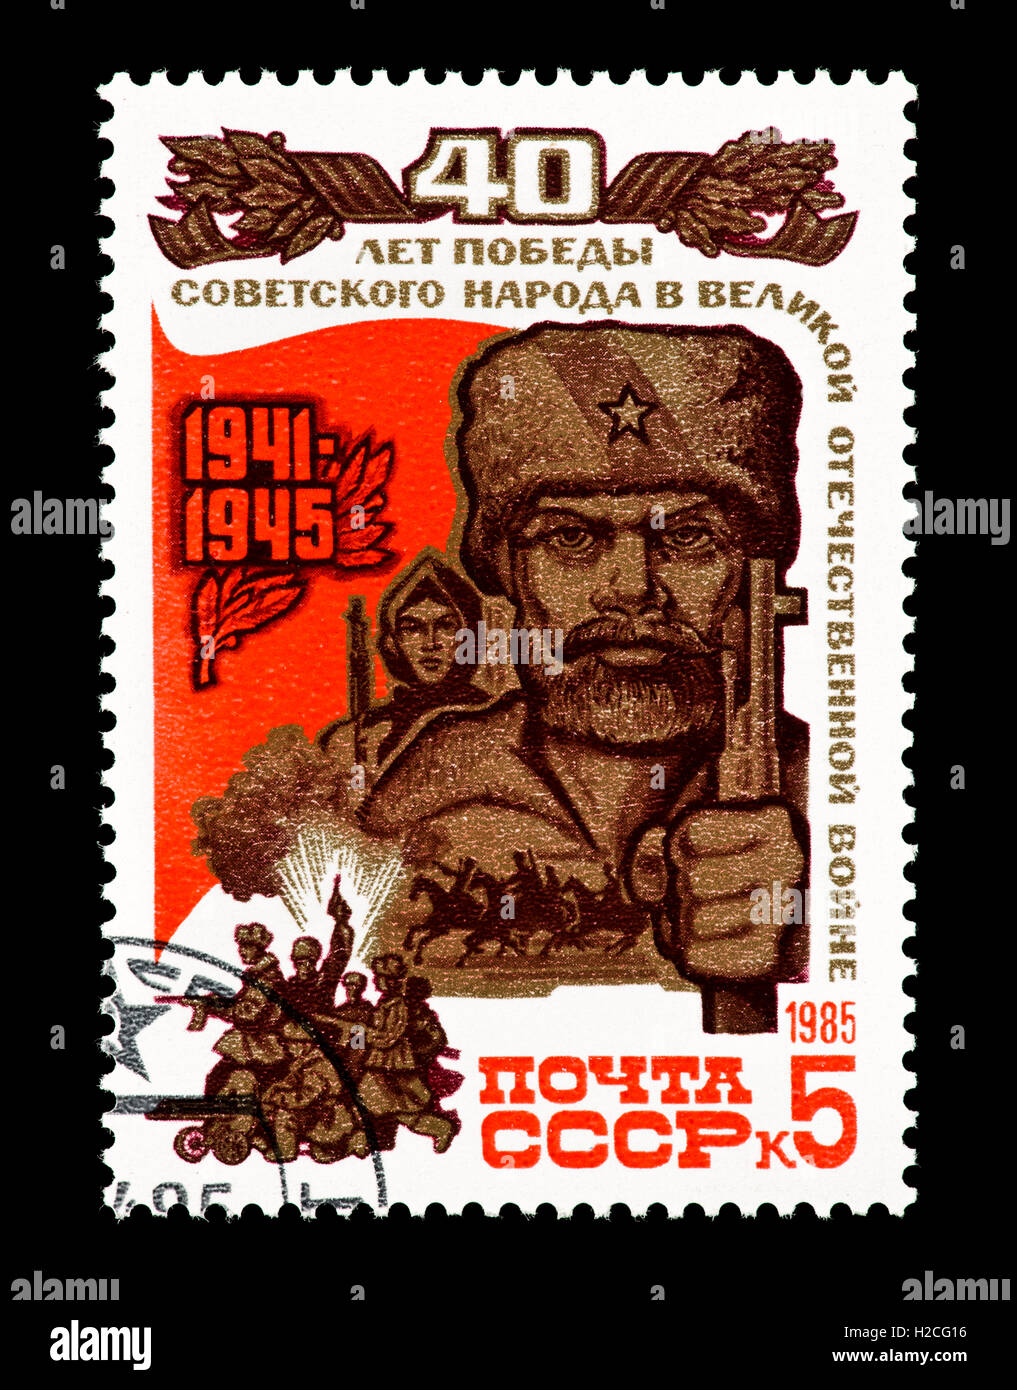 Postage stamp from the Soviet Union depicting a soldier and armed forces (end of World War 2, victory over fascism, 40th ann.) Stock Photo